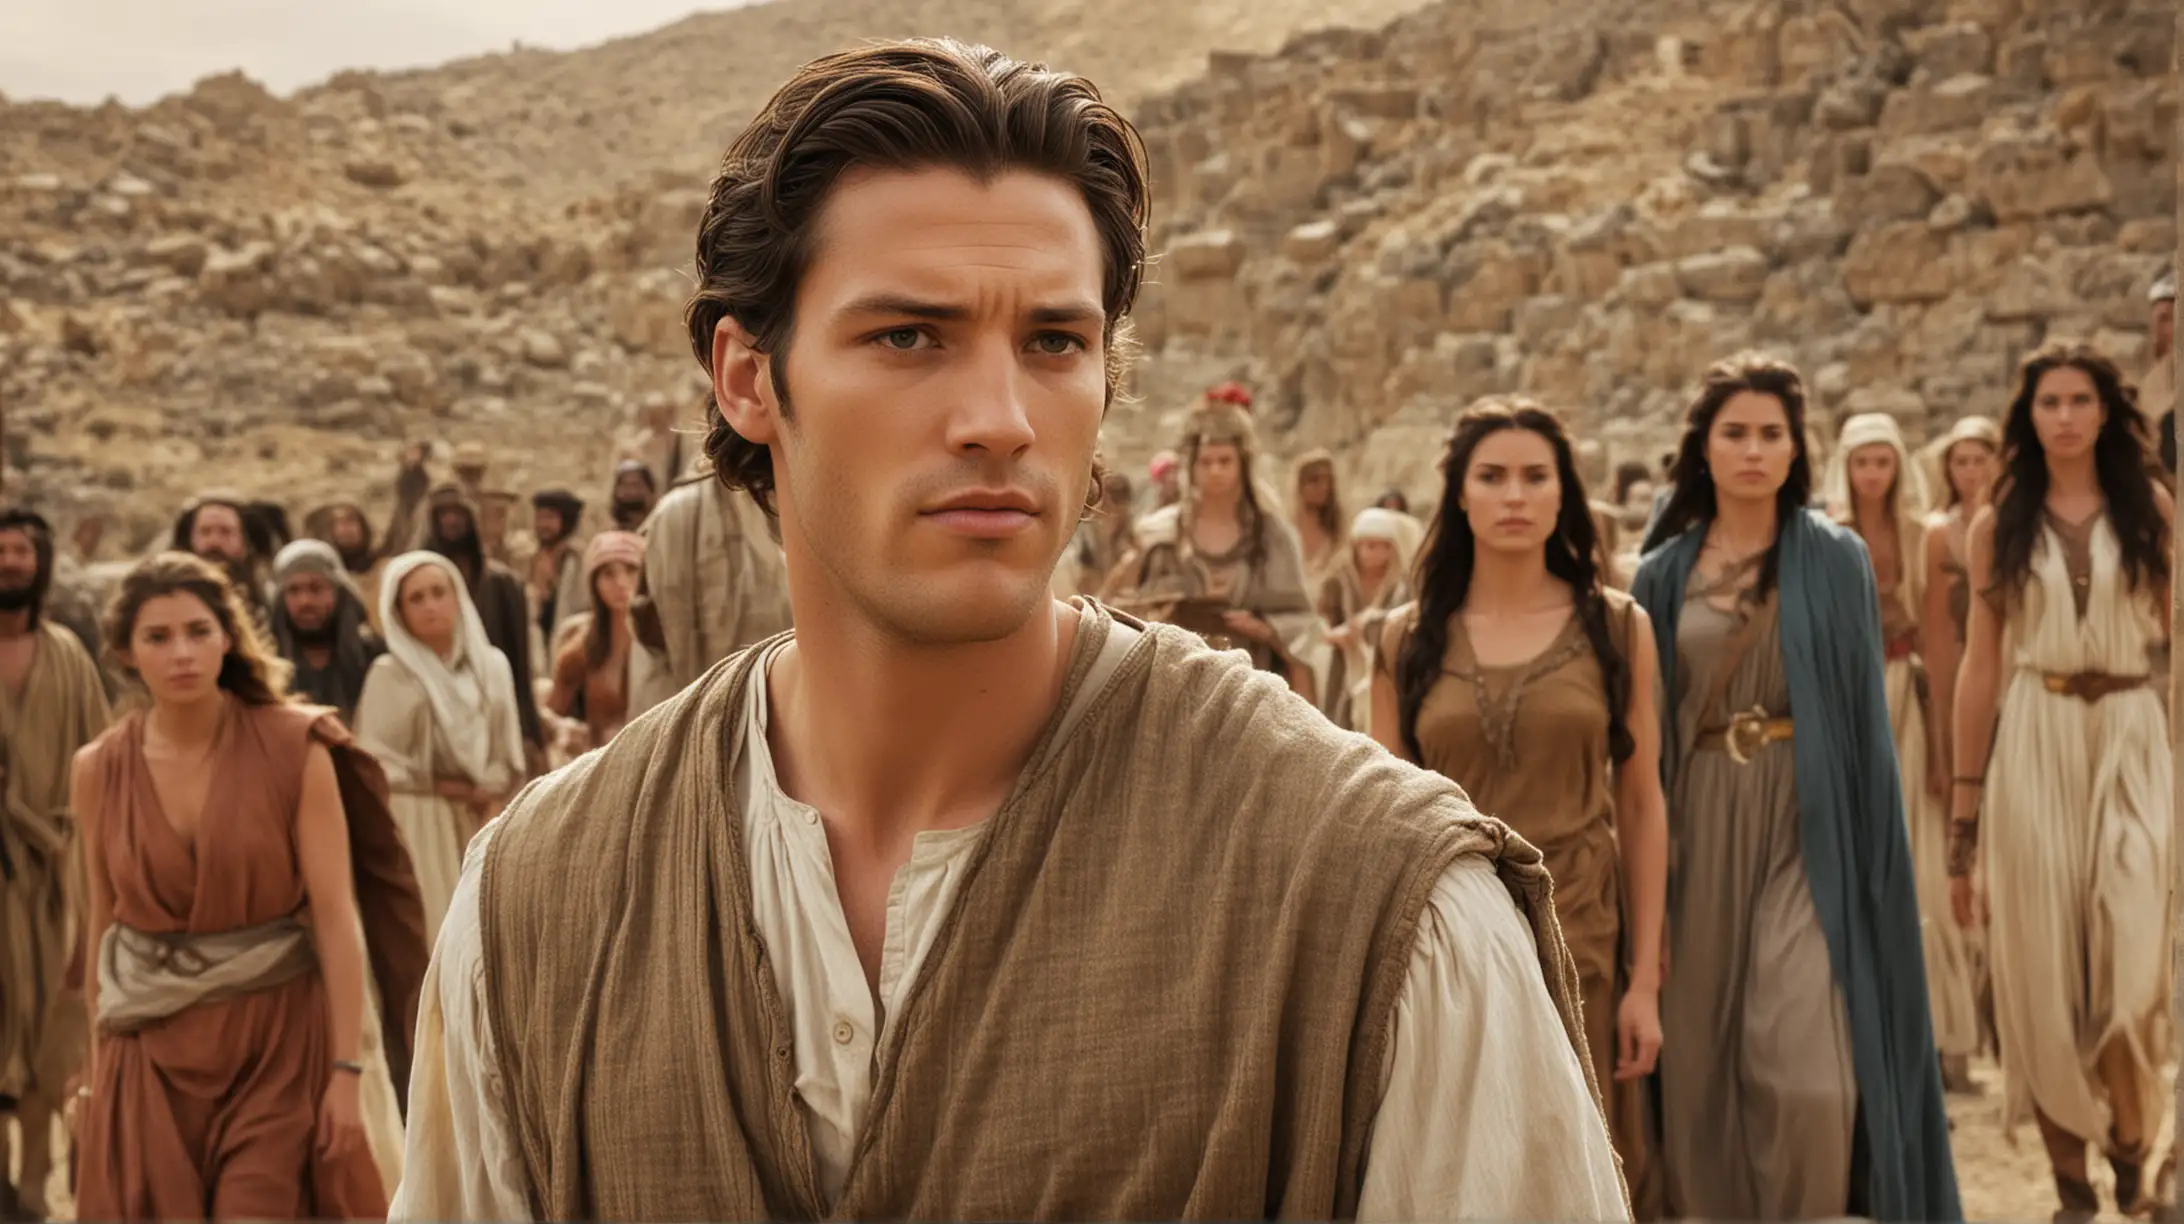 A well built handsome man in the foreground, with several pretty women behind him in the near distance. Set during the Biblical era of Moses.